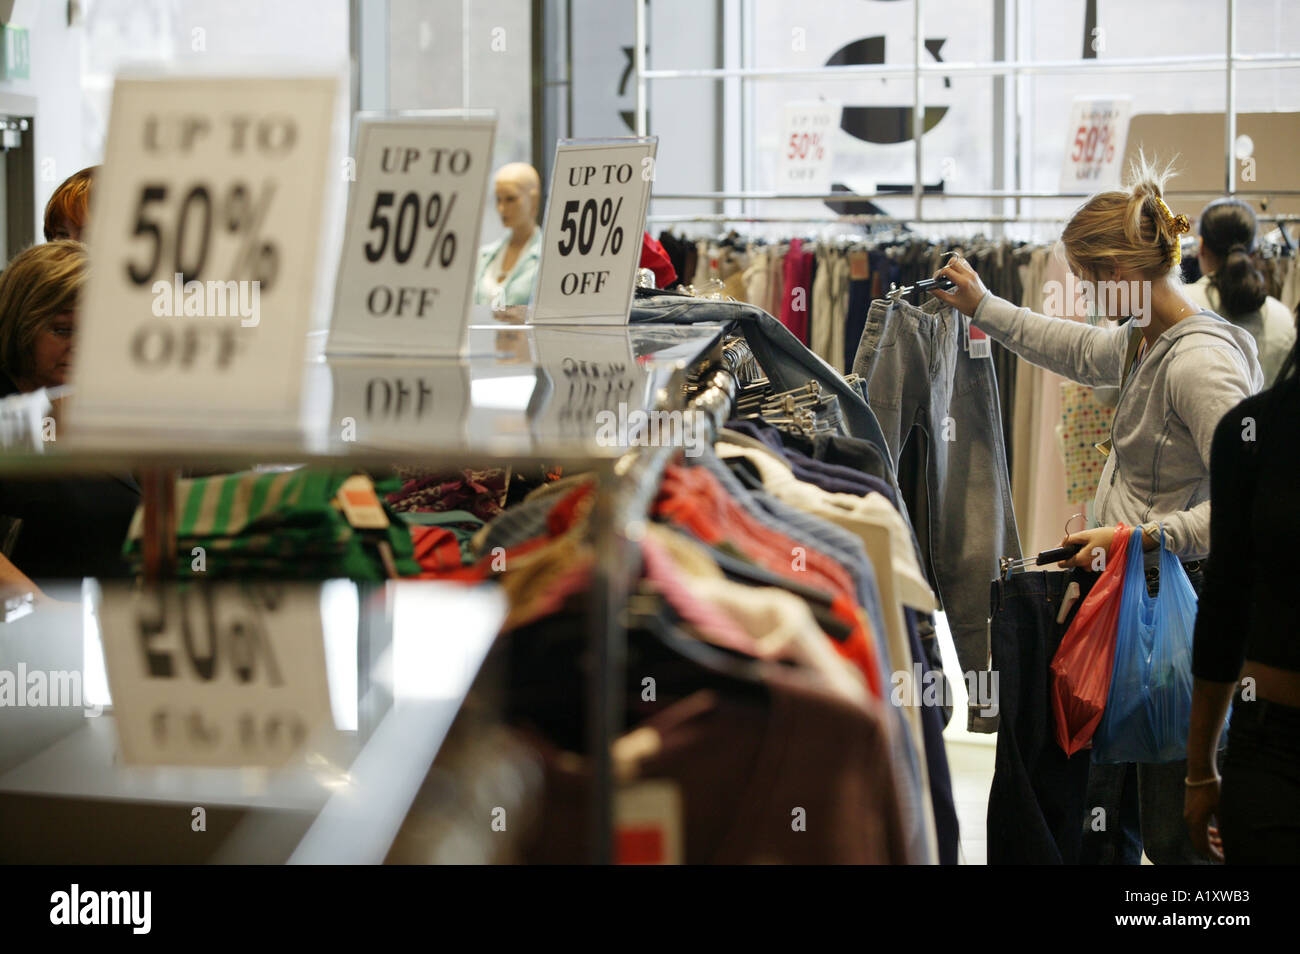 The Mango clothing store in the Bullring shopping centre Birmingham UK  holds a summer sale Stock Photo - Alamy